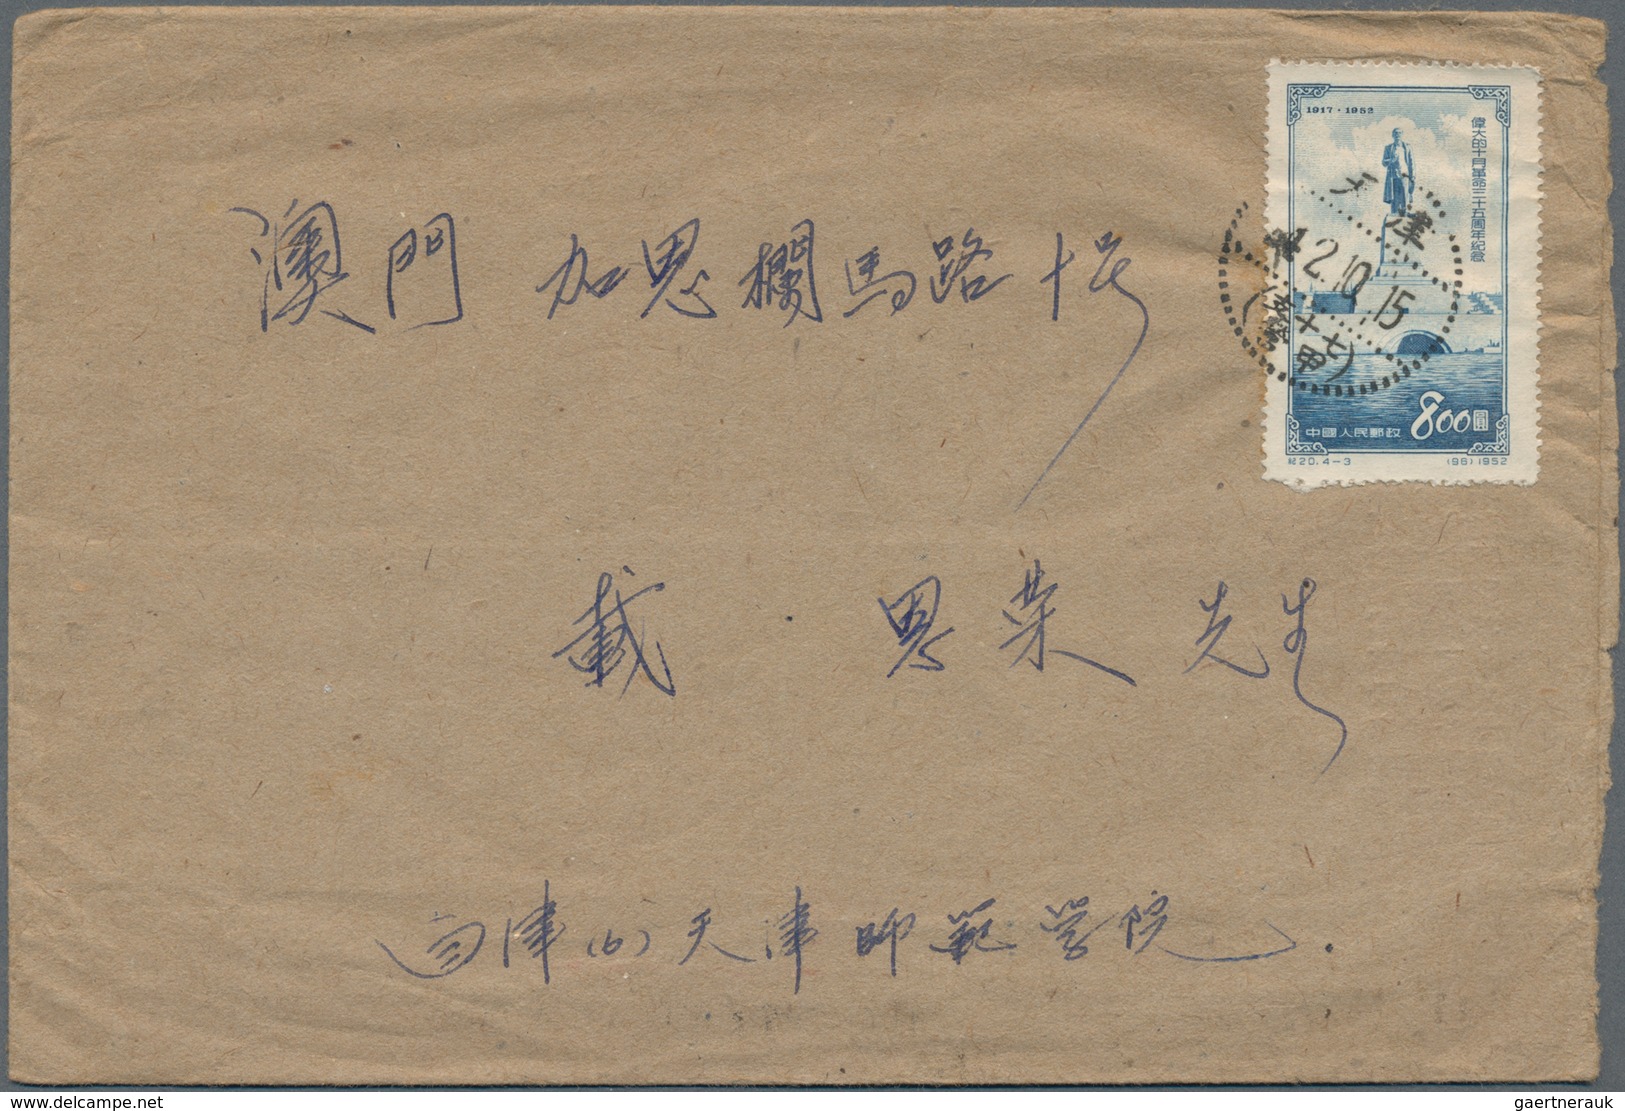 China - Volksrepublik: 1952/59, covers (10) mostly old currency and single franks, inc. used to Maca